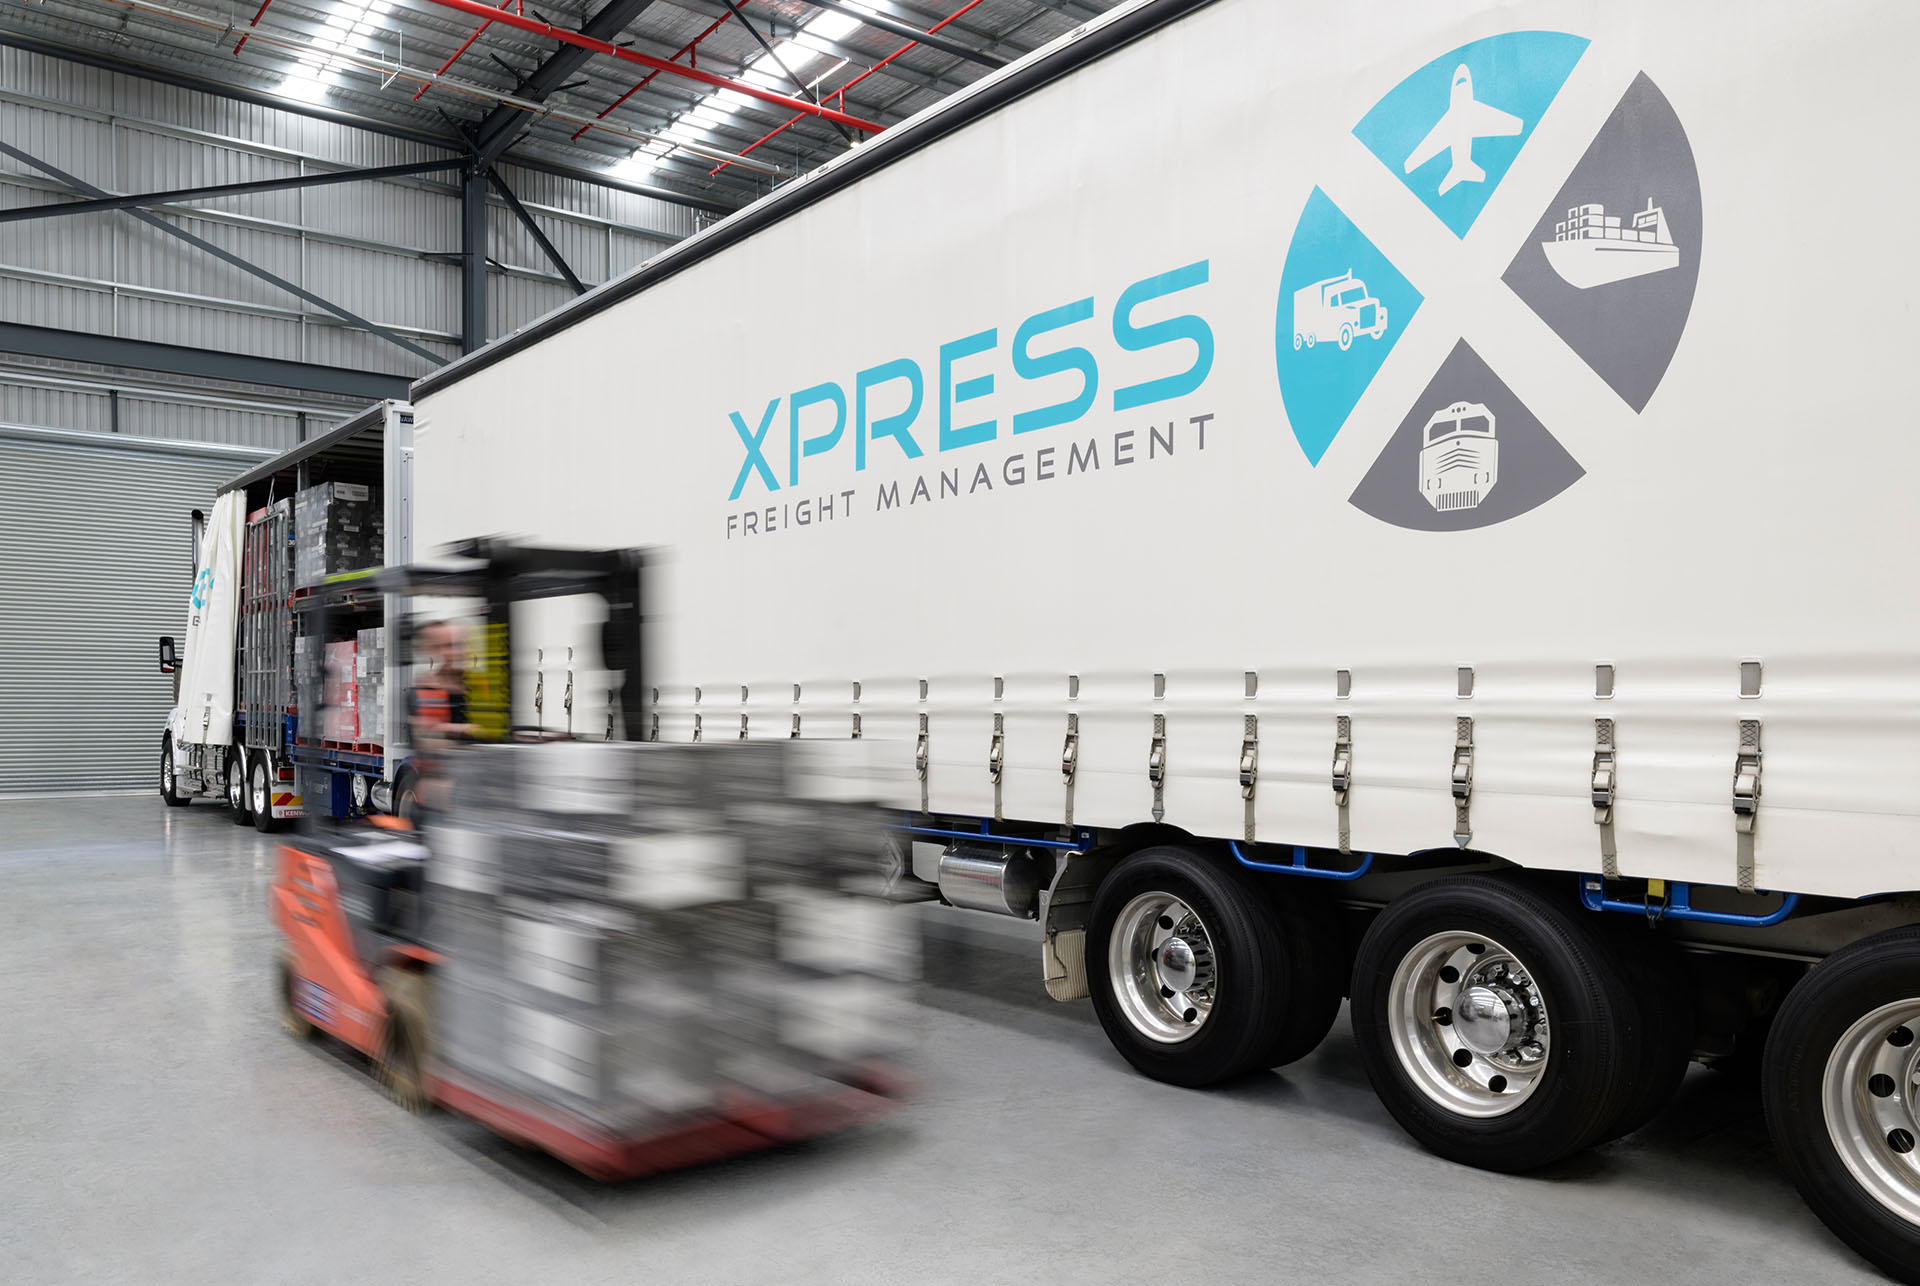 XPress Freight Management truck pallet being unloaded by a forklift inside of depot location